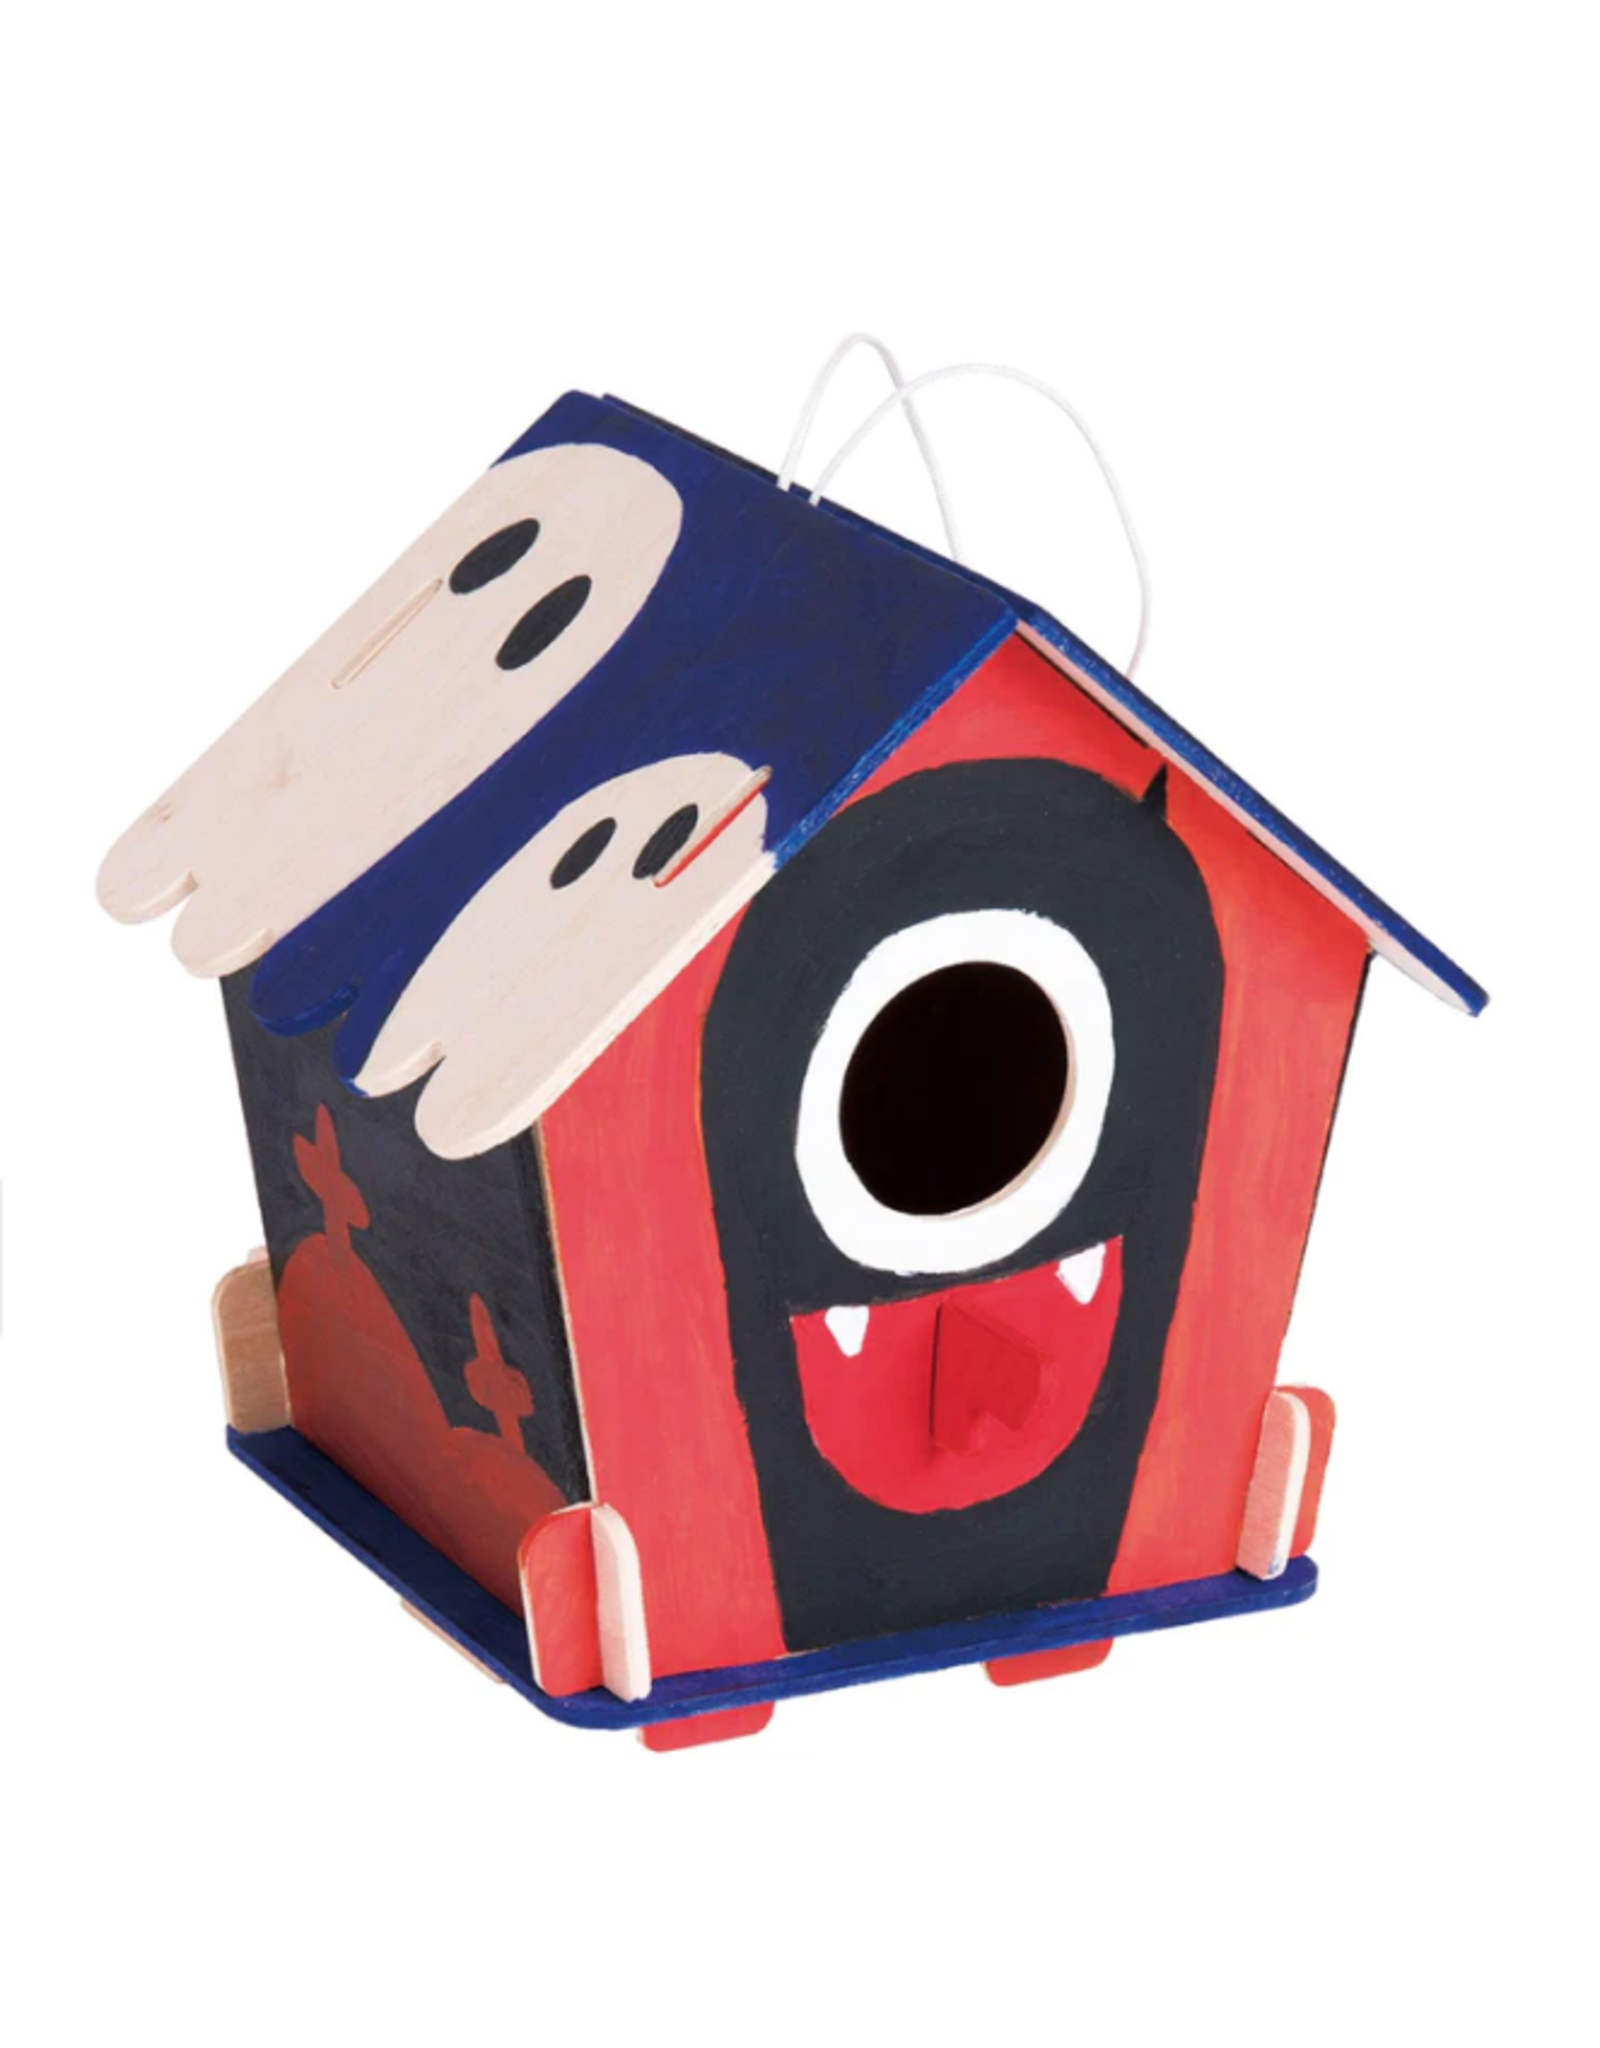 Hands Craft 3D Wooden Birdhouse With Paint Kit